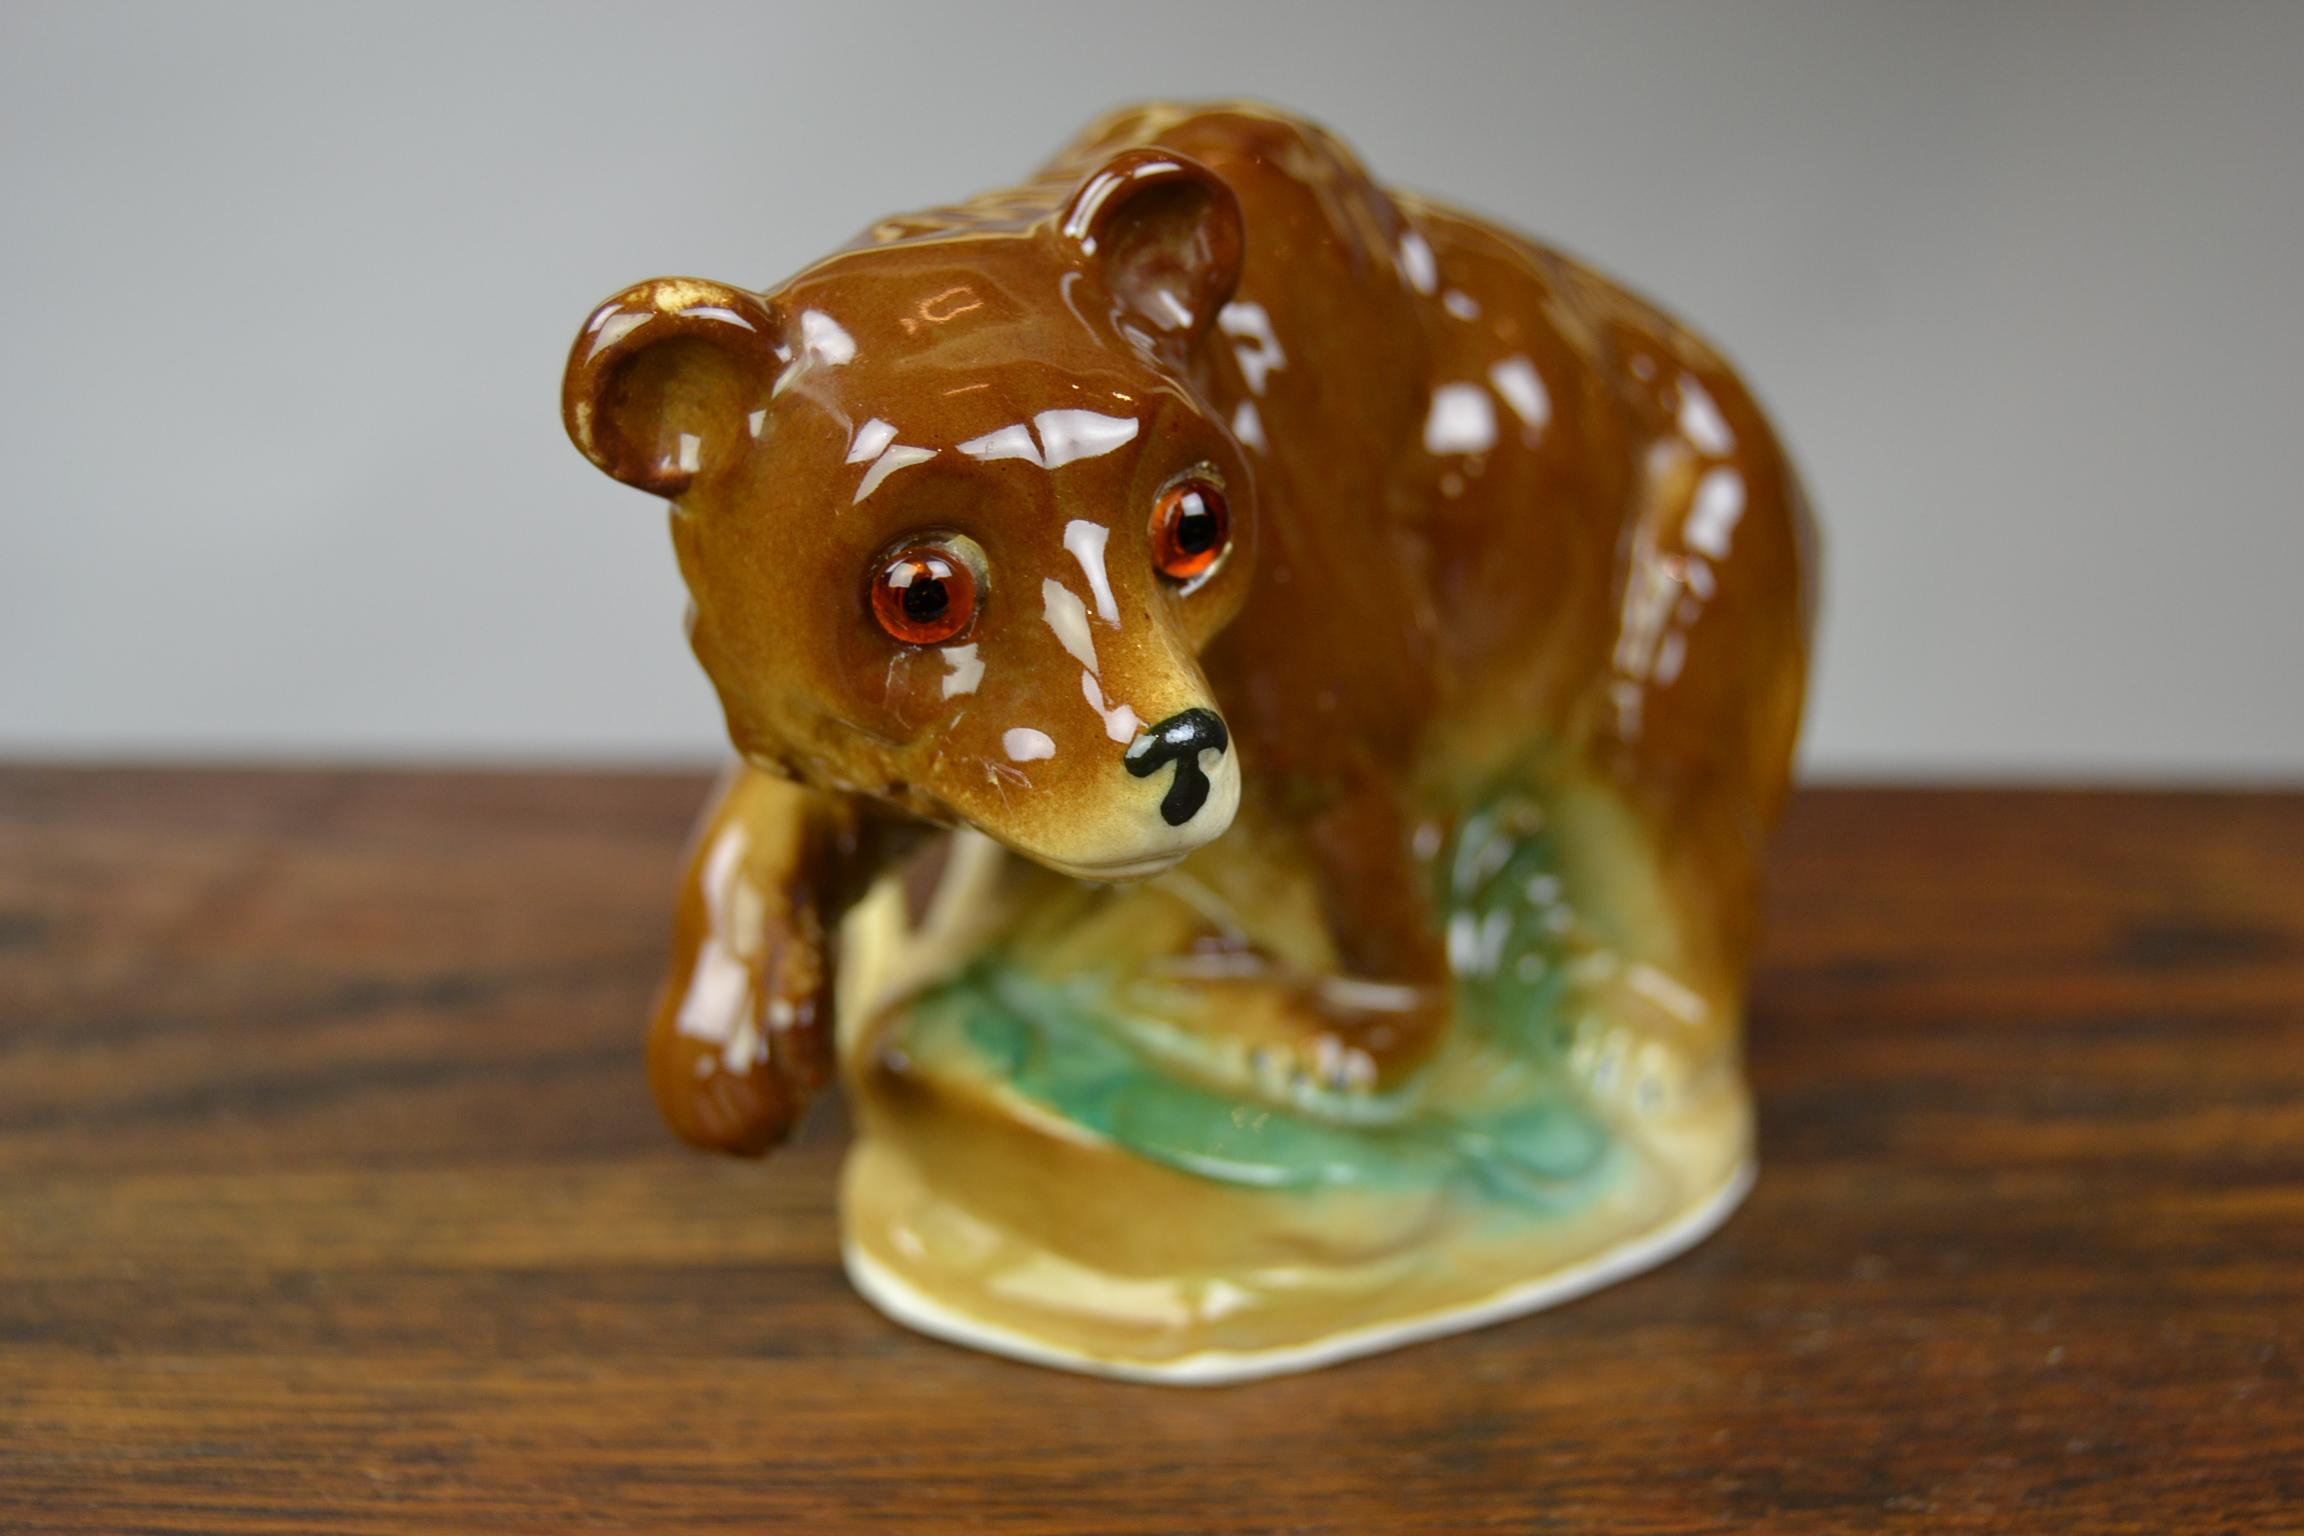 Porcelain perfume lamp in the shape of a brown bear - porcelain bear sculpture with light inside.
This wild animal figurine - animal statue dates circa 1930-1940. 
The plug has already been renewed. 

Perfume lamps were used to camouflage bad smell